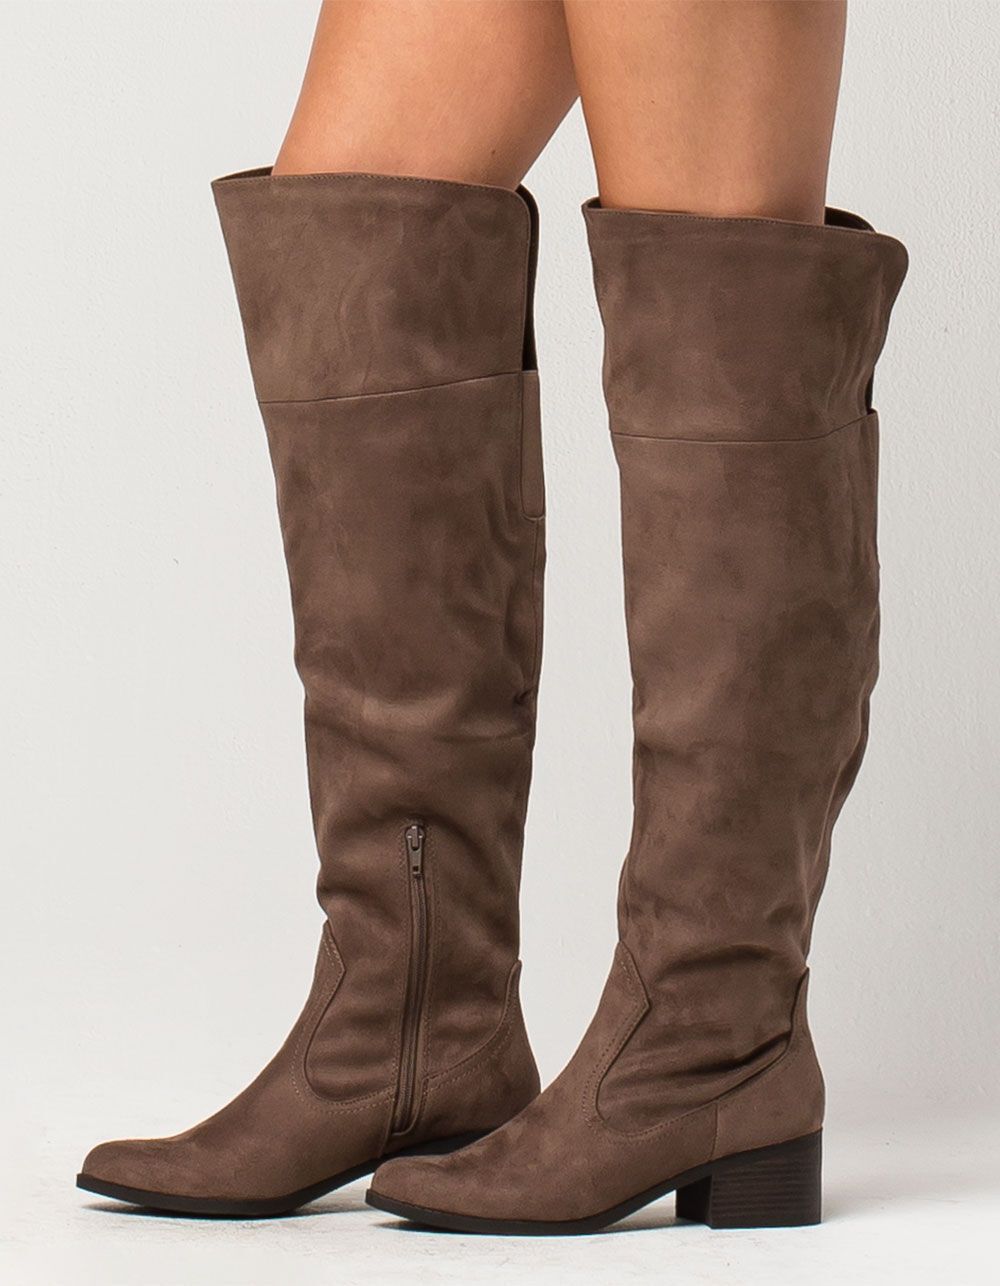 CITY CLASSIFIED OVER THE KNEE BOOTS | Tillys